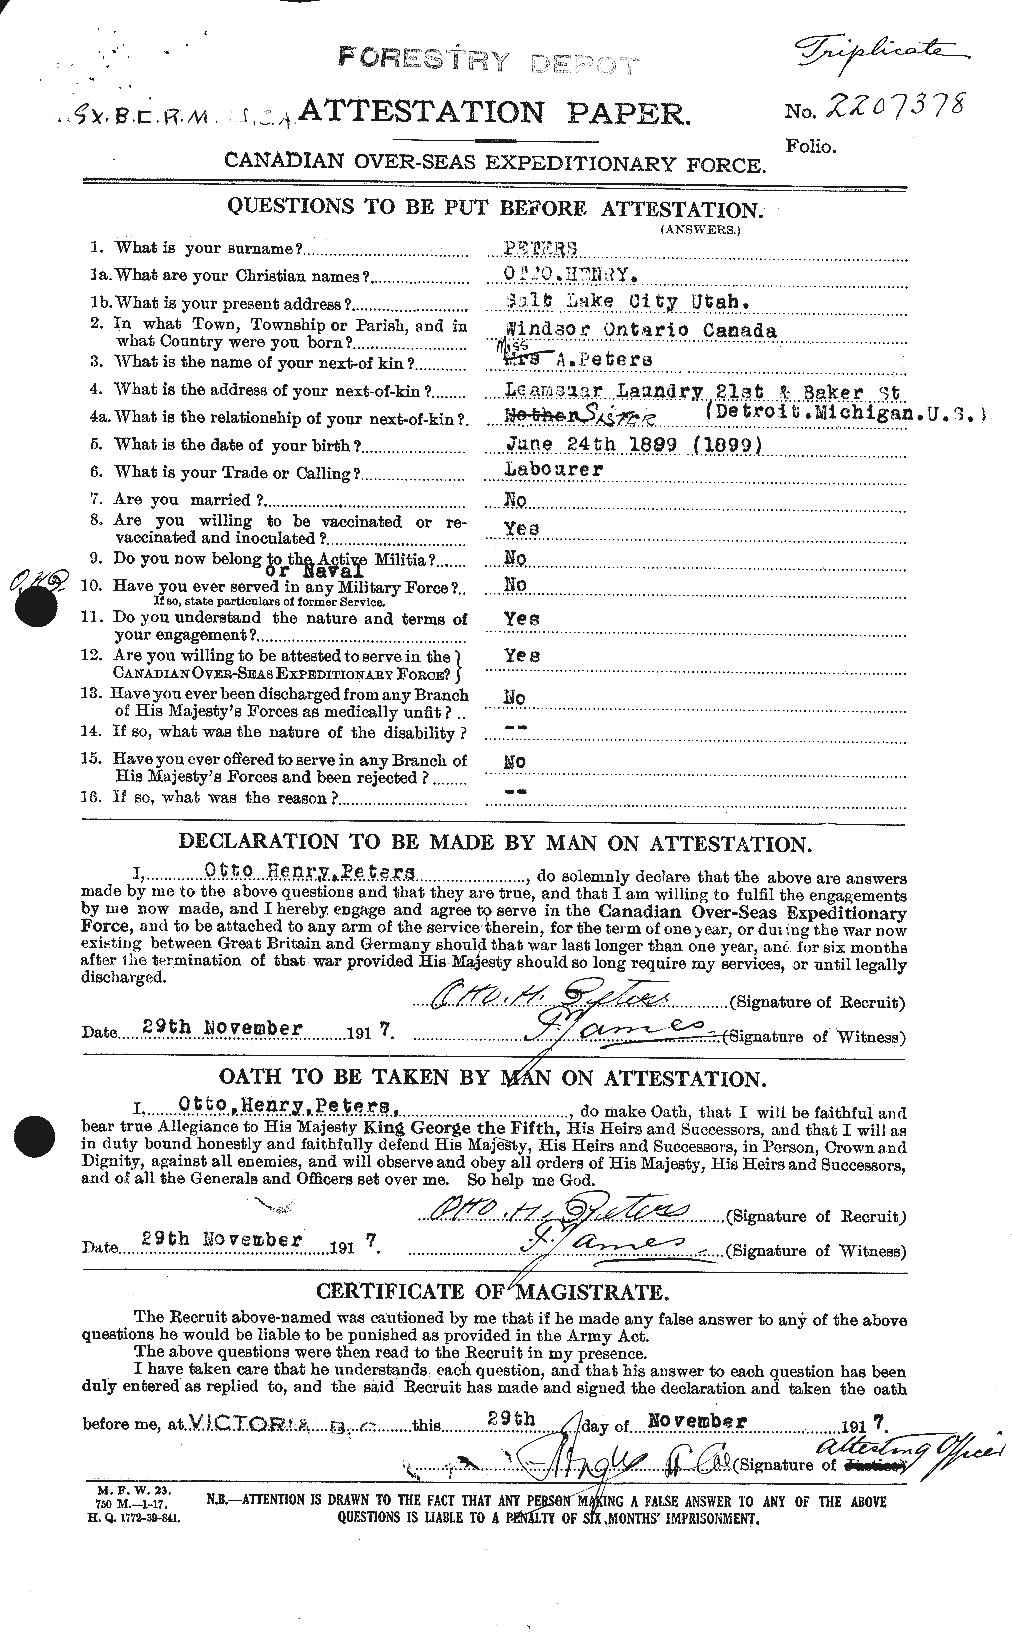 Personnel Records of the First World War - CEF 575592a